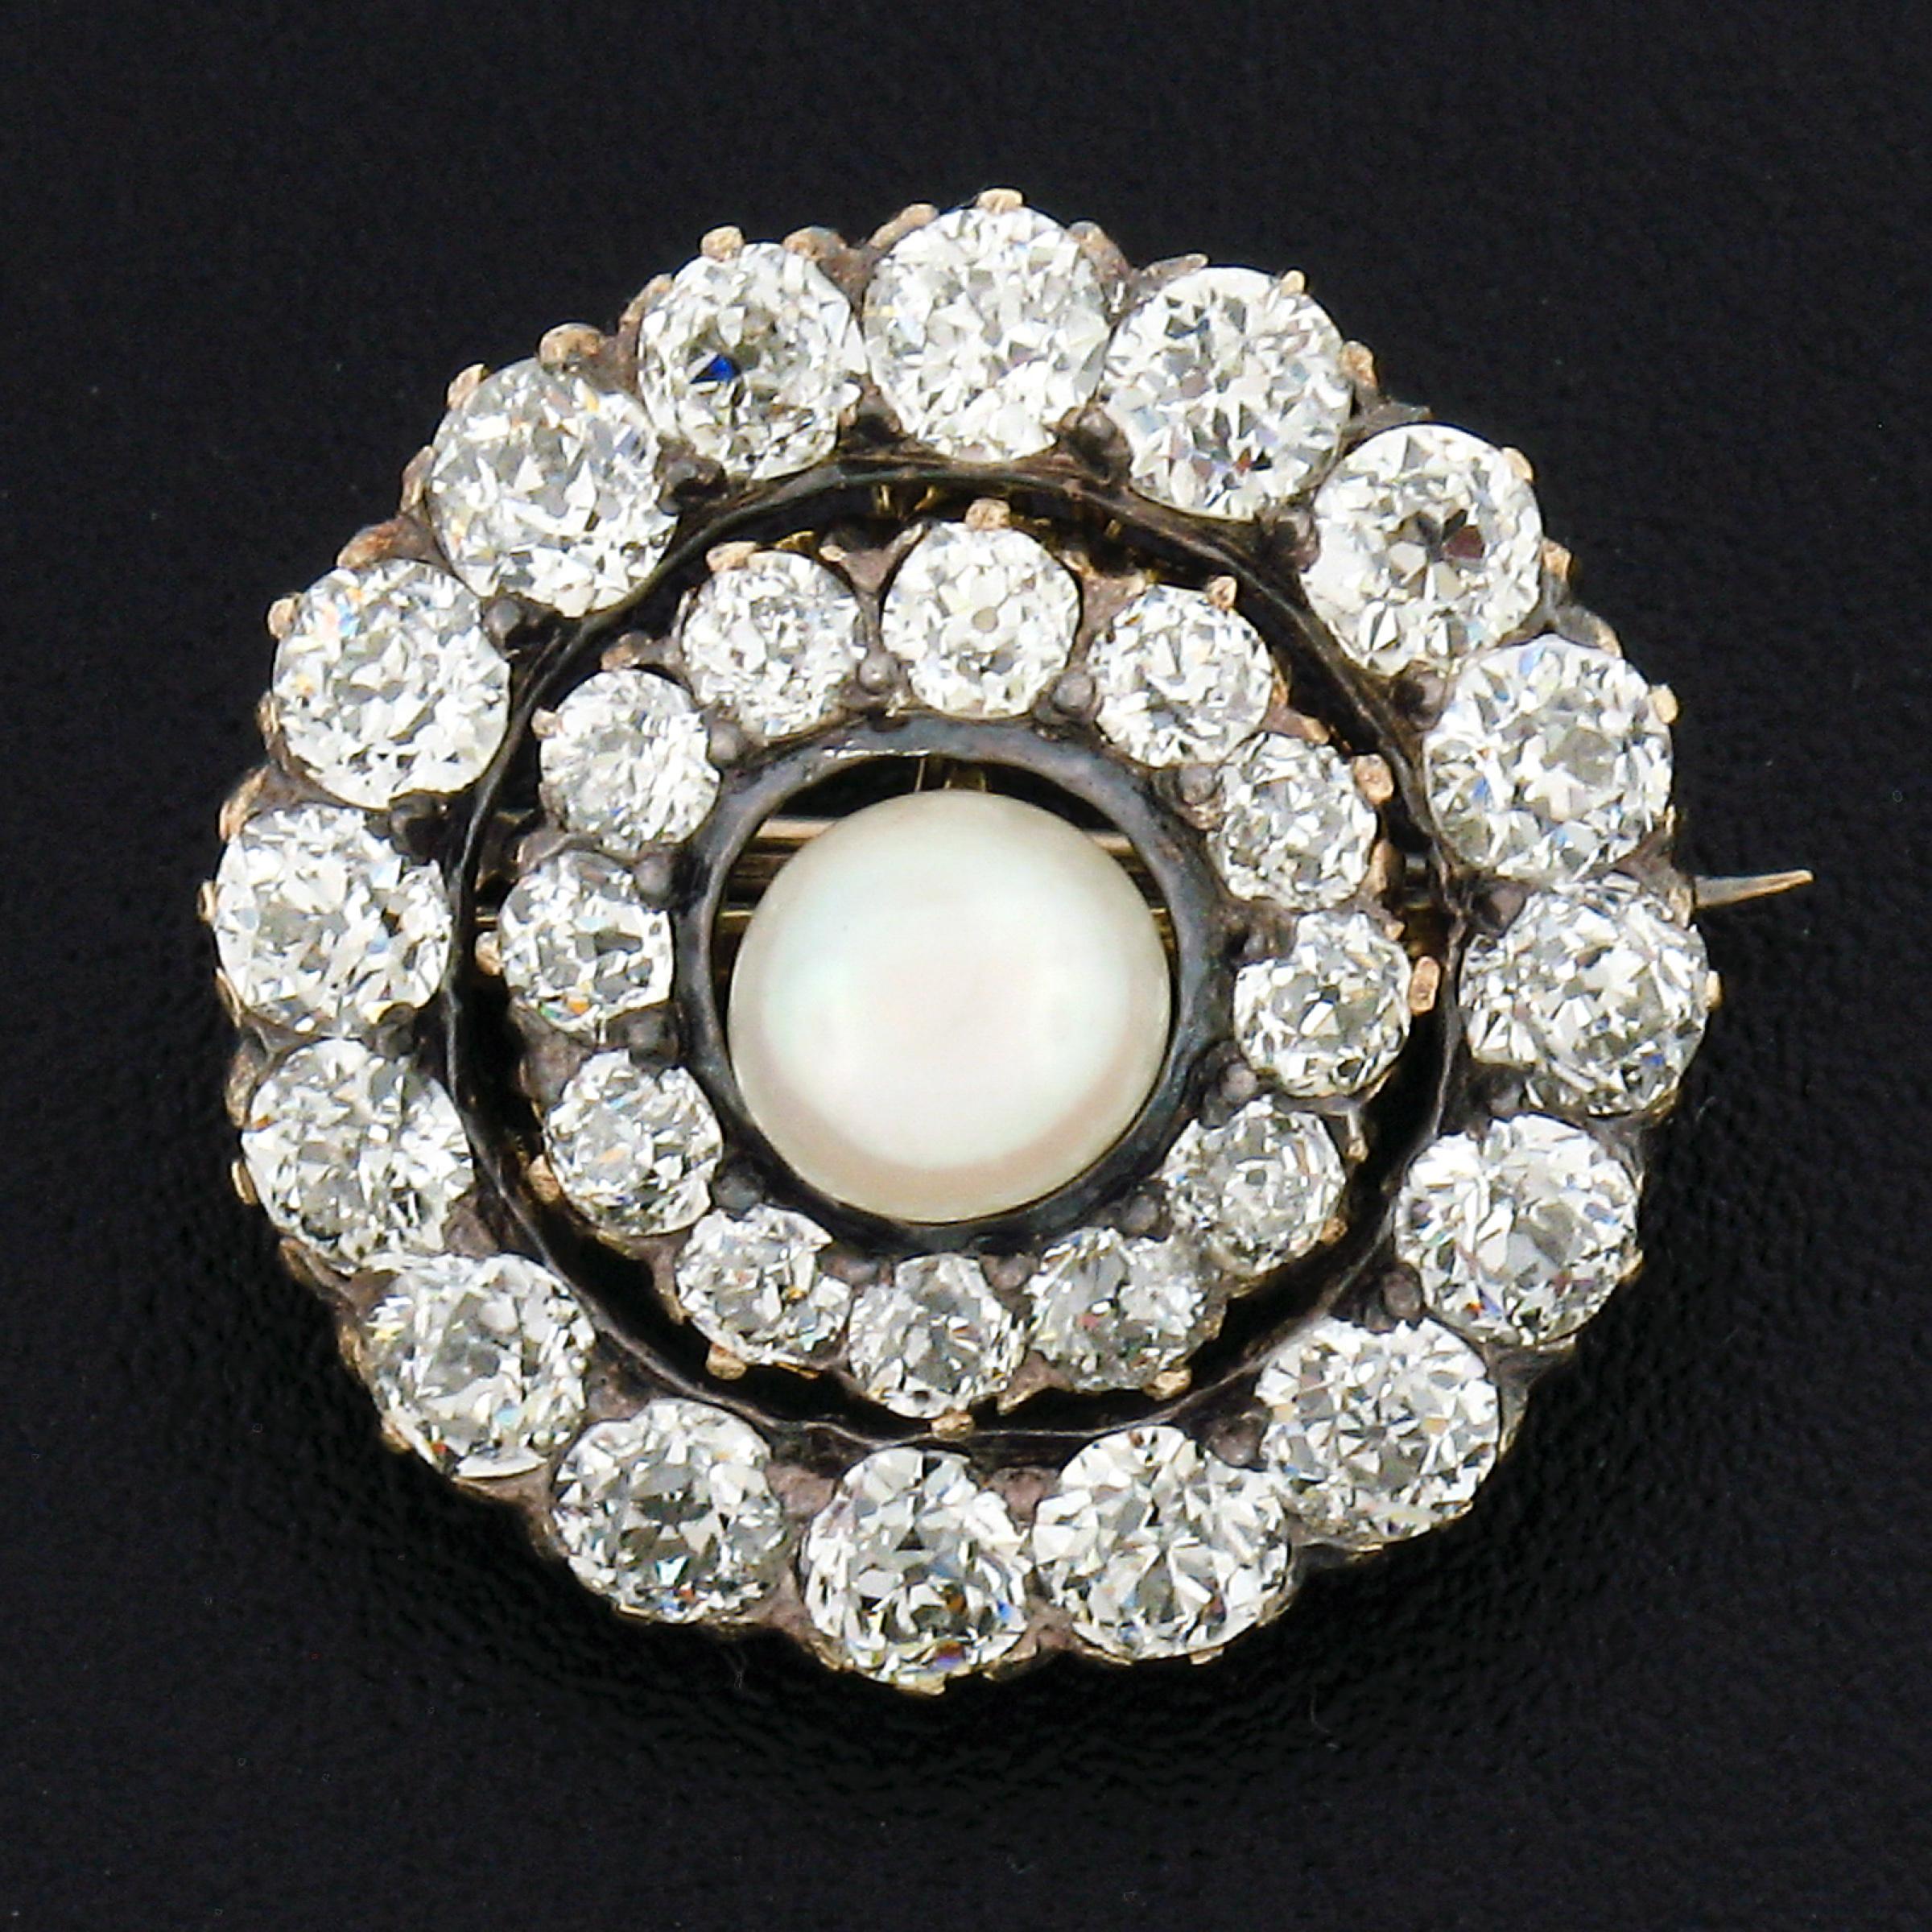 This unique antique pin/brooch or pendant was crafted during the early Victorian period in solid 14k gold and features a wonderful dual circular design that is elegantly covered with old mine and European cut diamonds throughout. The center of the